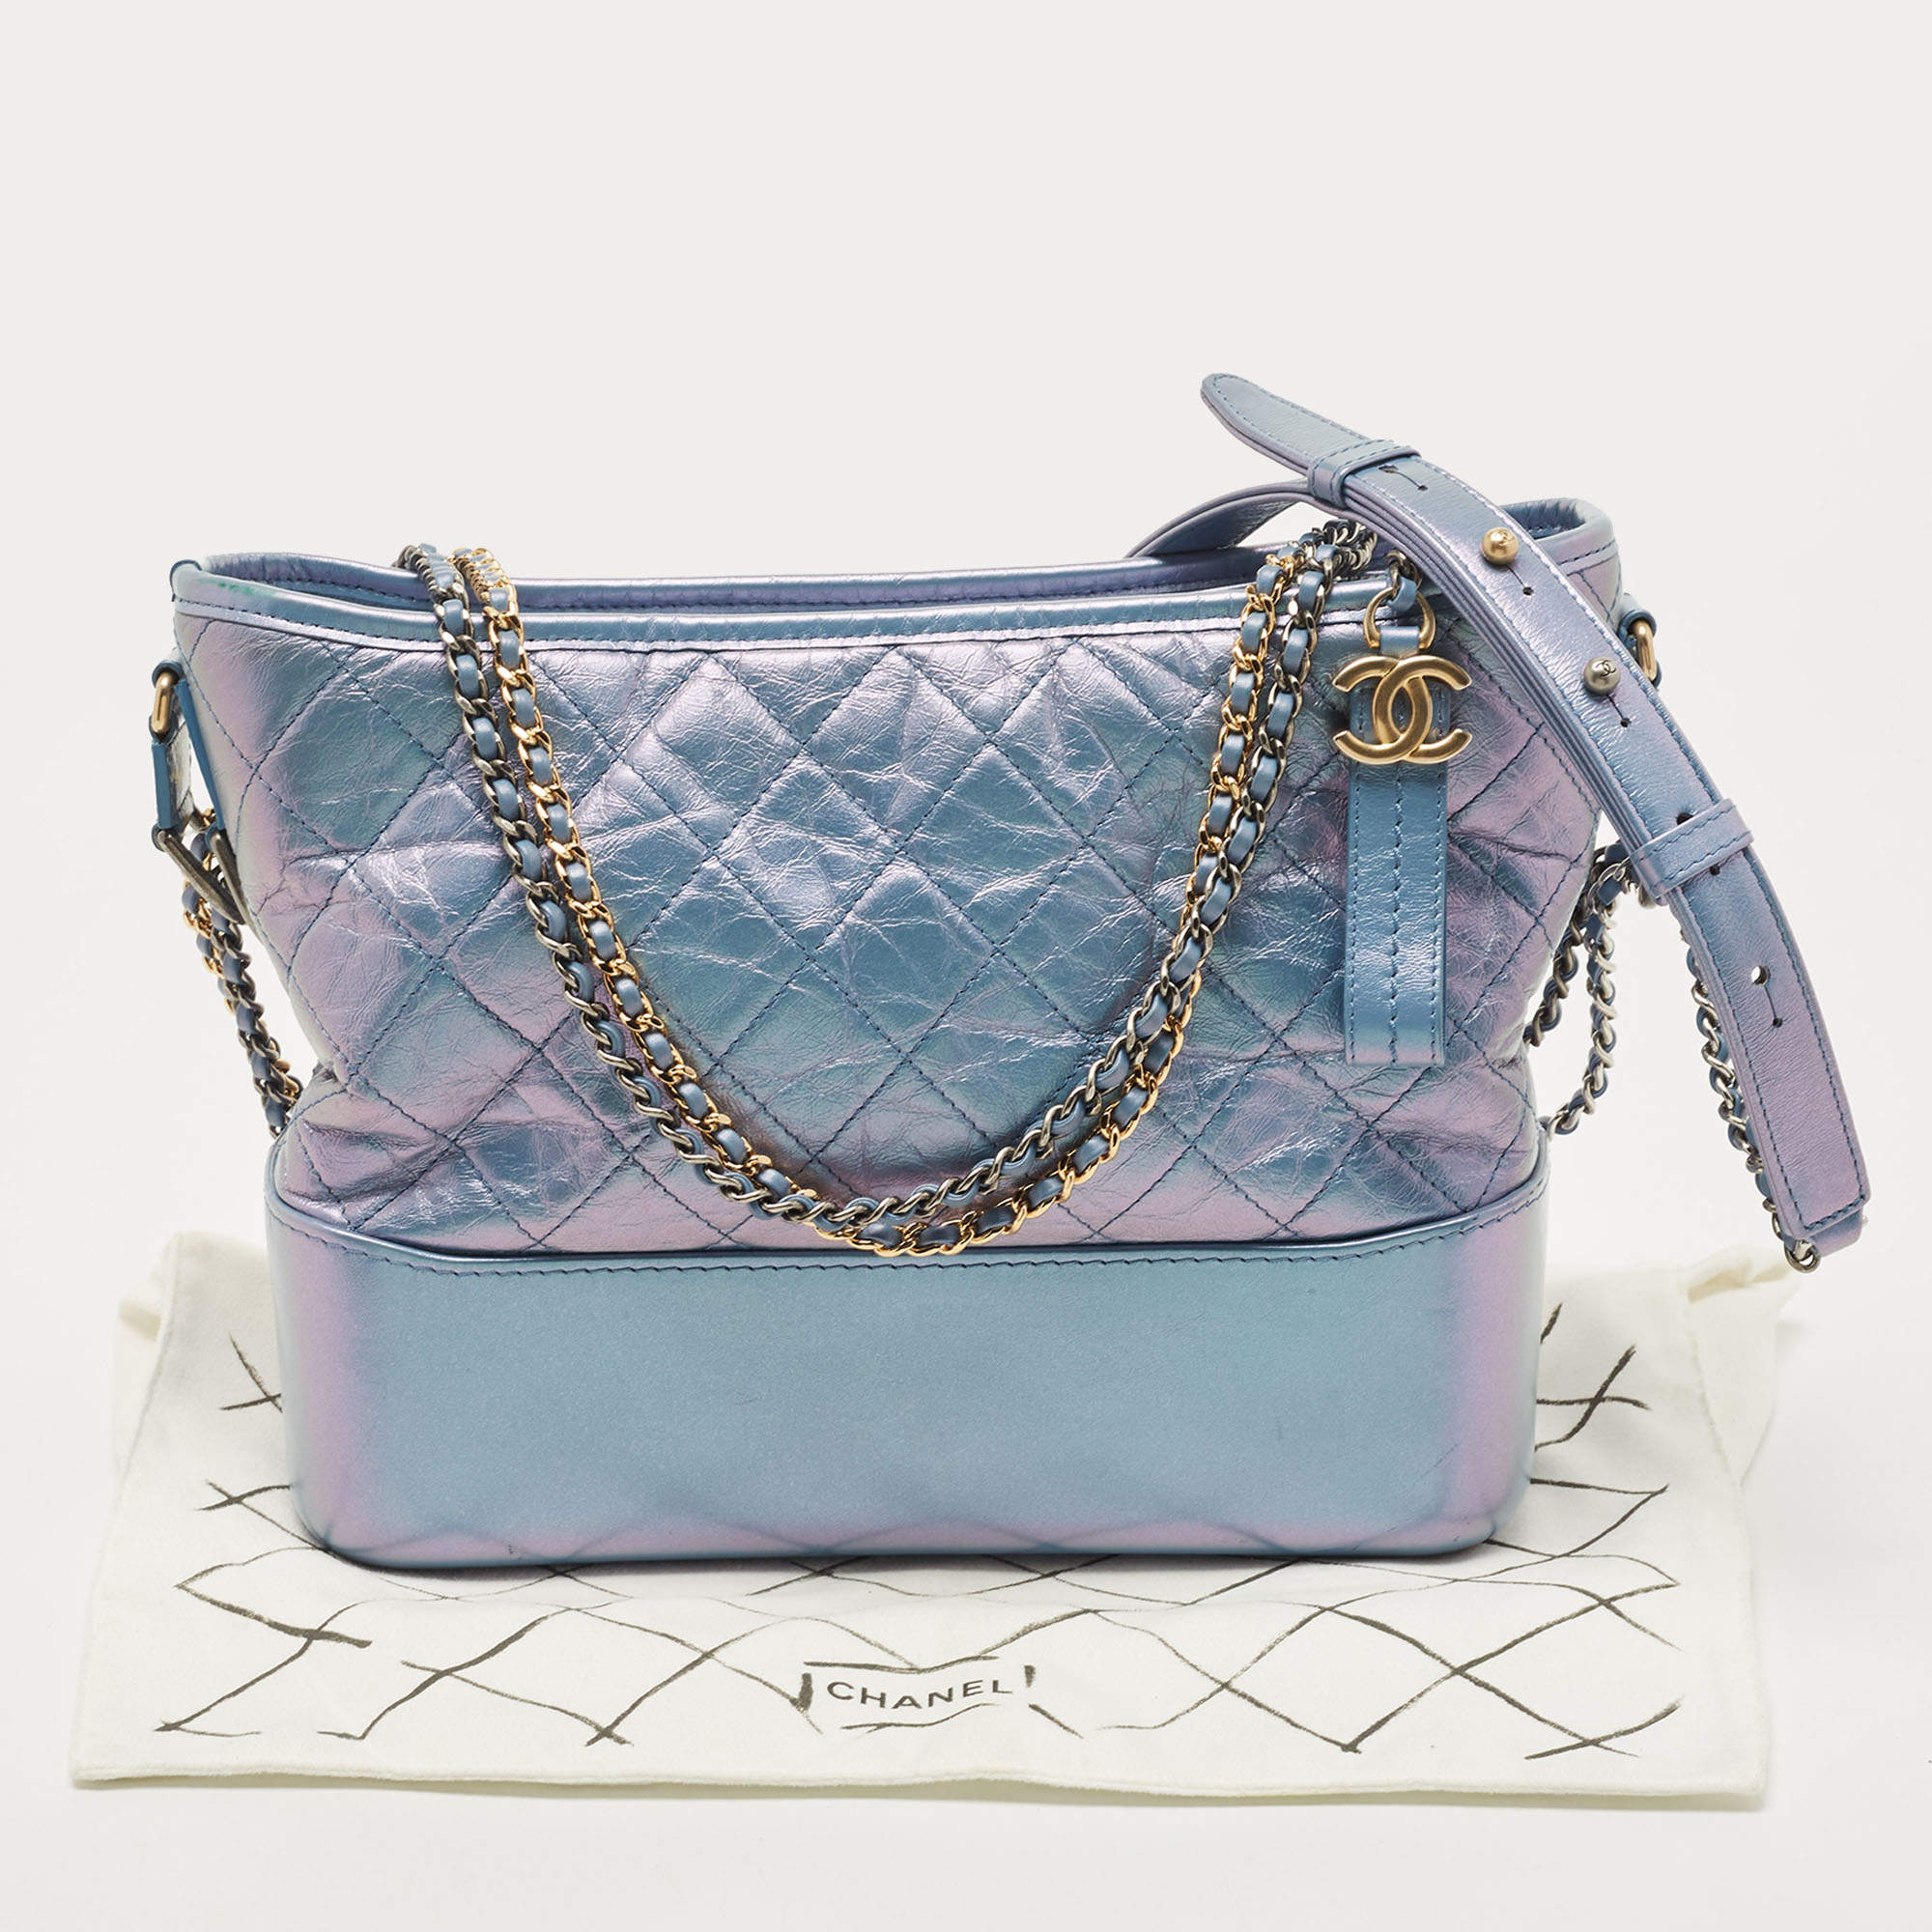 Chanel Light Blue Shimmer Quilted Aged Leather Medium Gabrielle Hobo